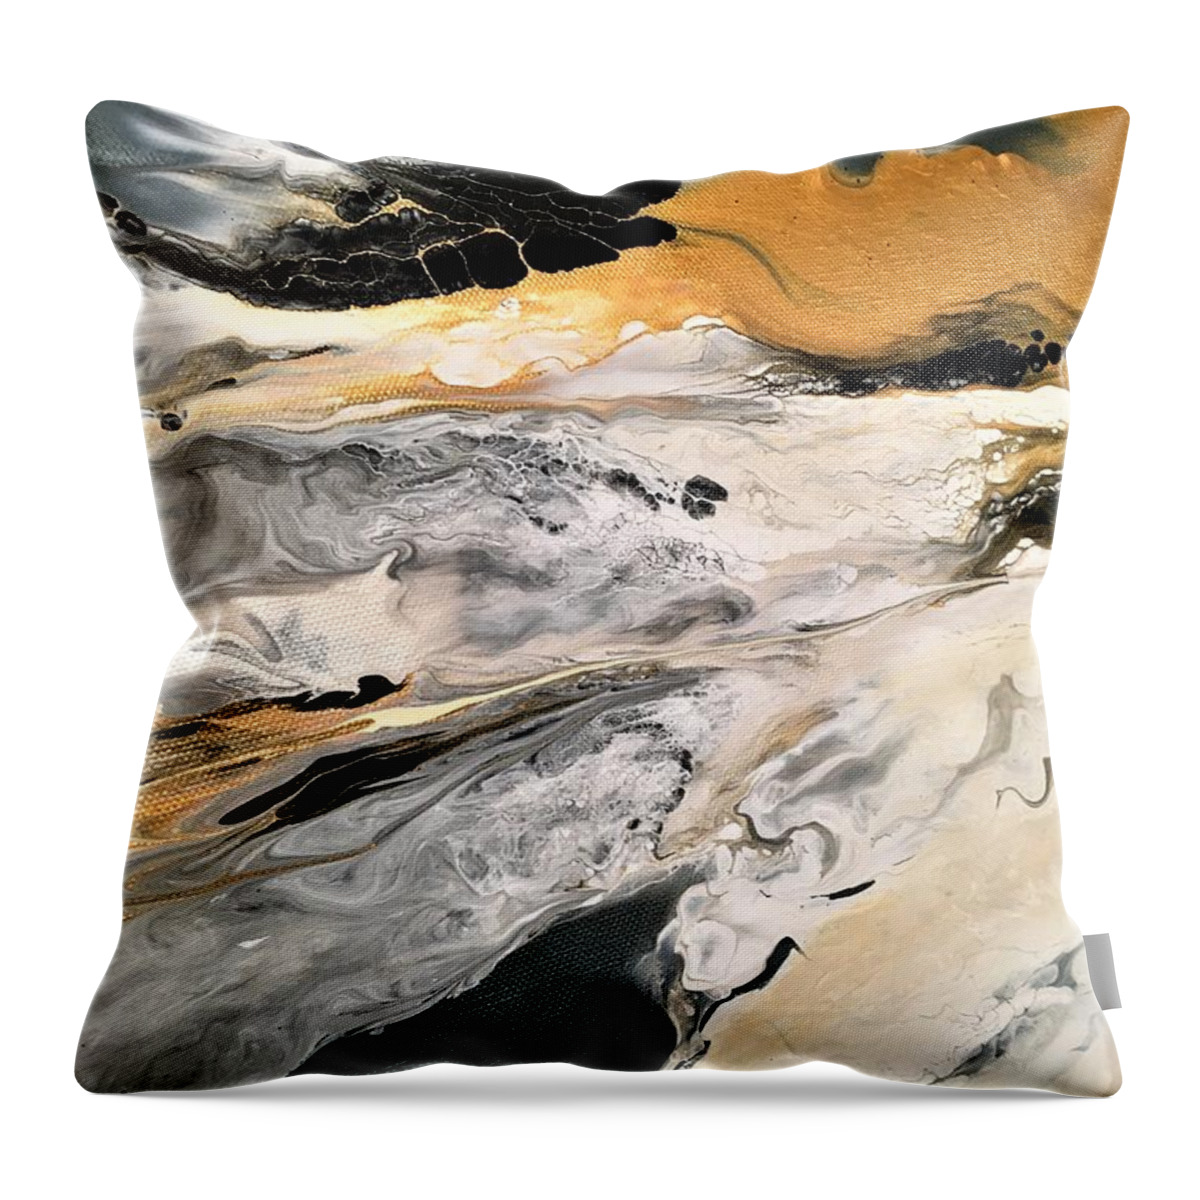 Abstract Throw Pillow featuring the painting Be 1 by Soraya Silvestri